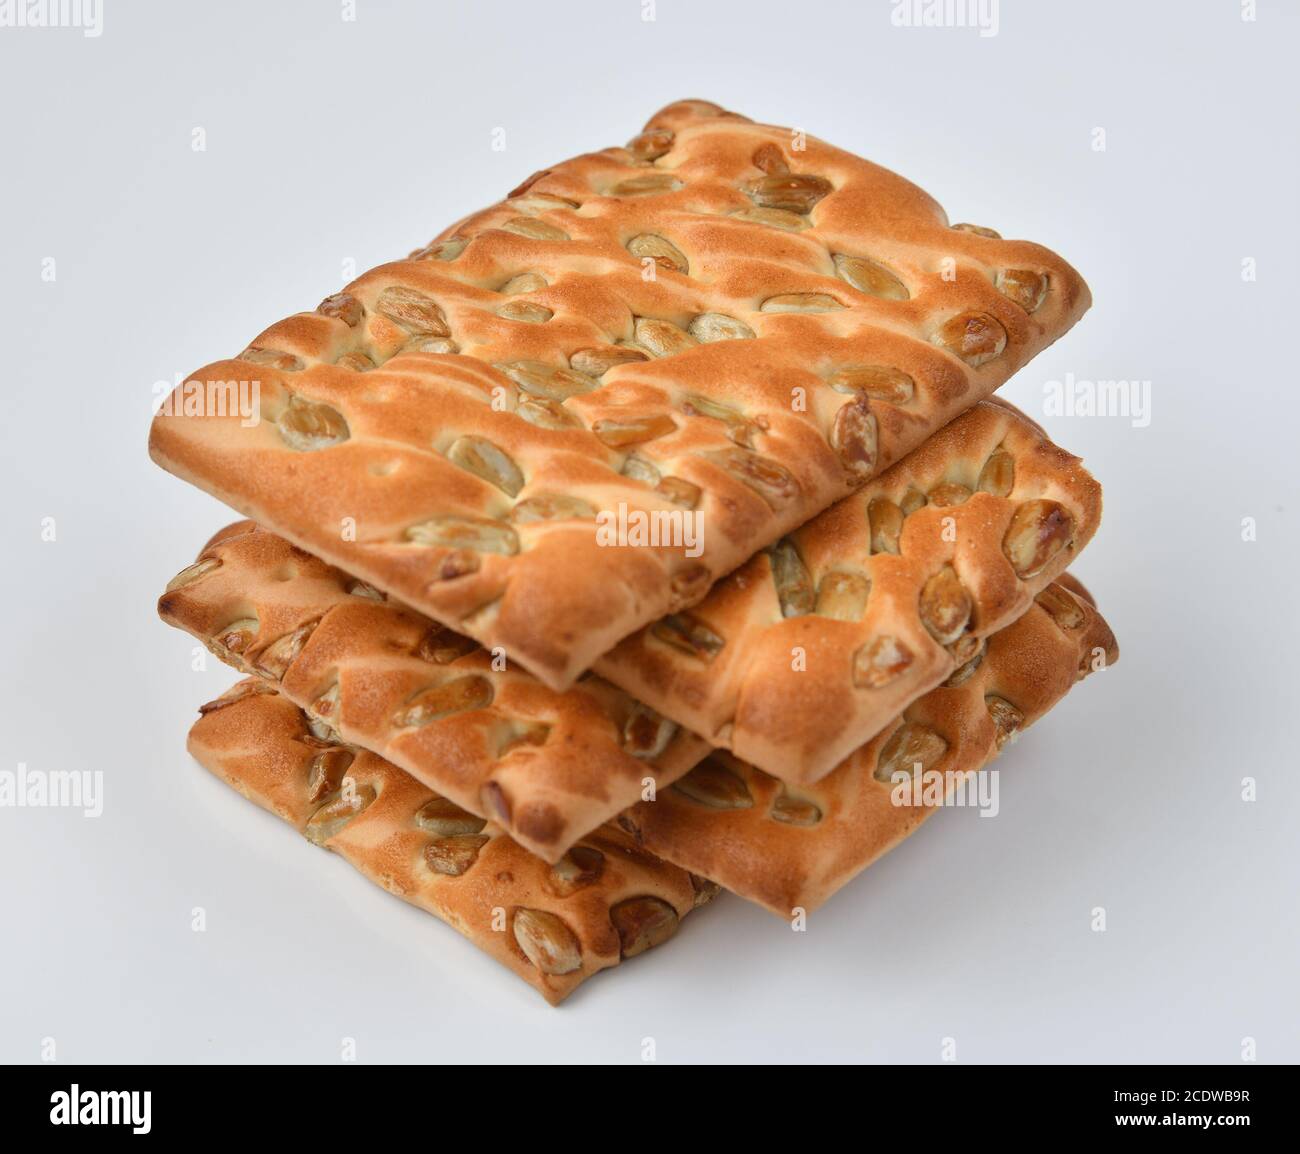 The dietetic biscuits with a sunflower seeds Stock Photo